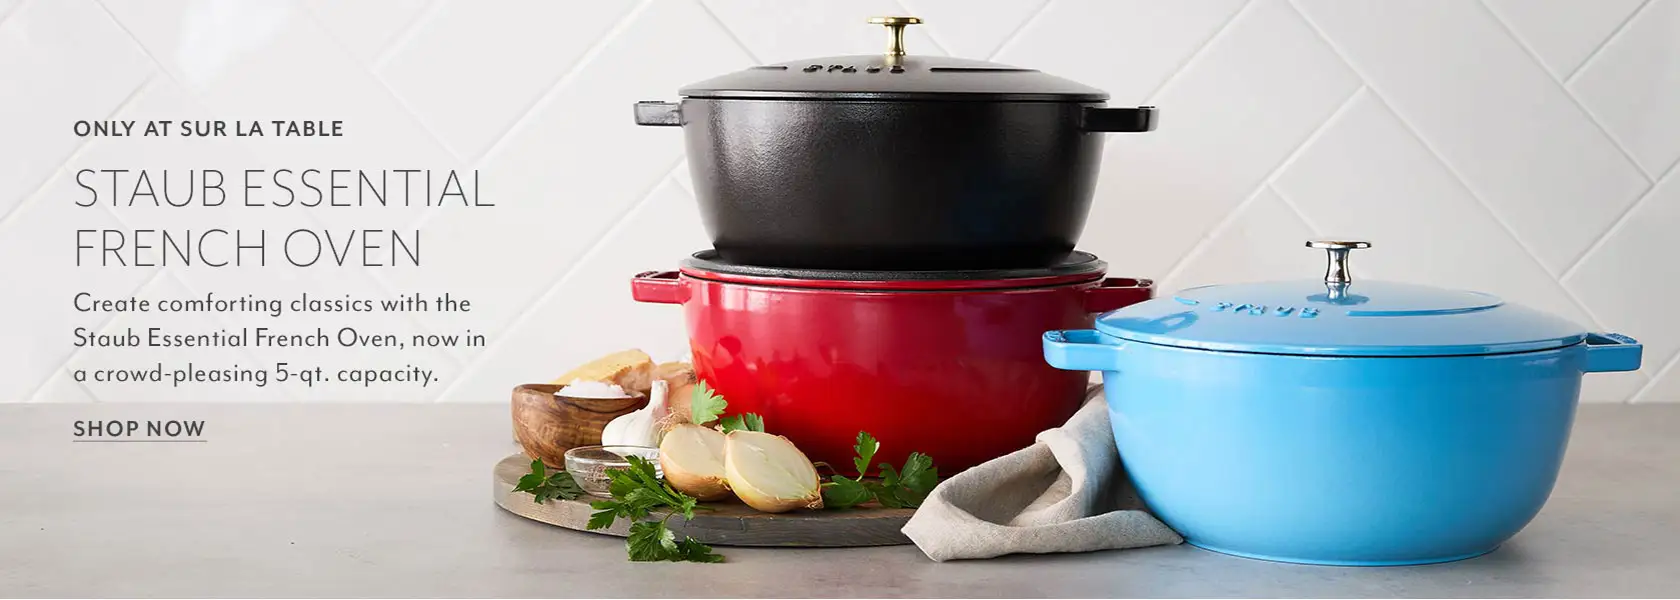 Only at Sur La Table Staub Essential French Oven. Create comforting classics with the Staub Essential French Oven, now in a crowd-pleasing 5-quart capacity. Shop Now.